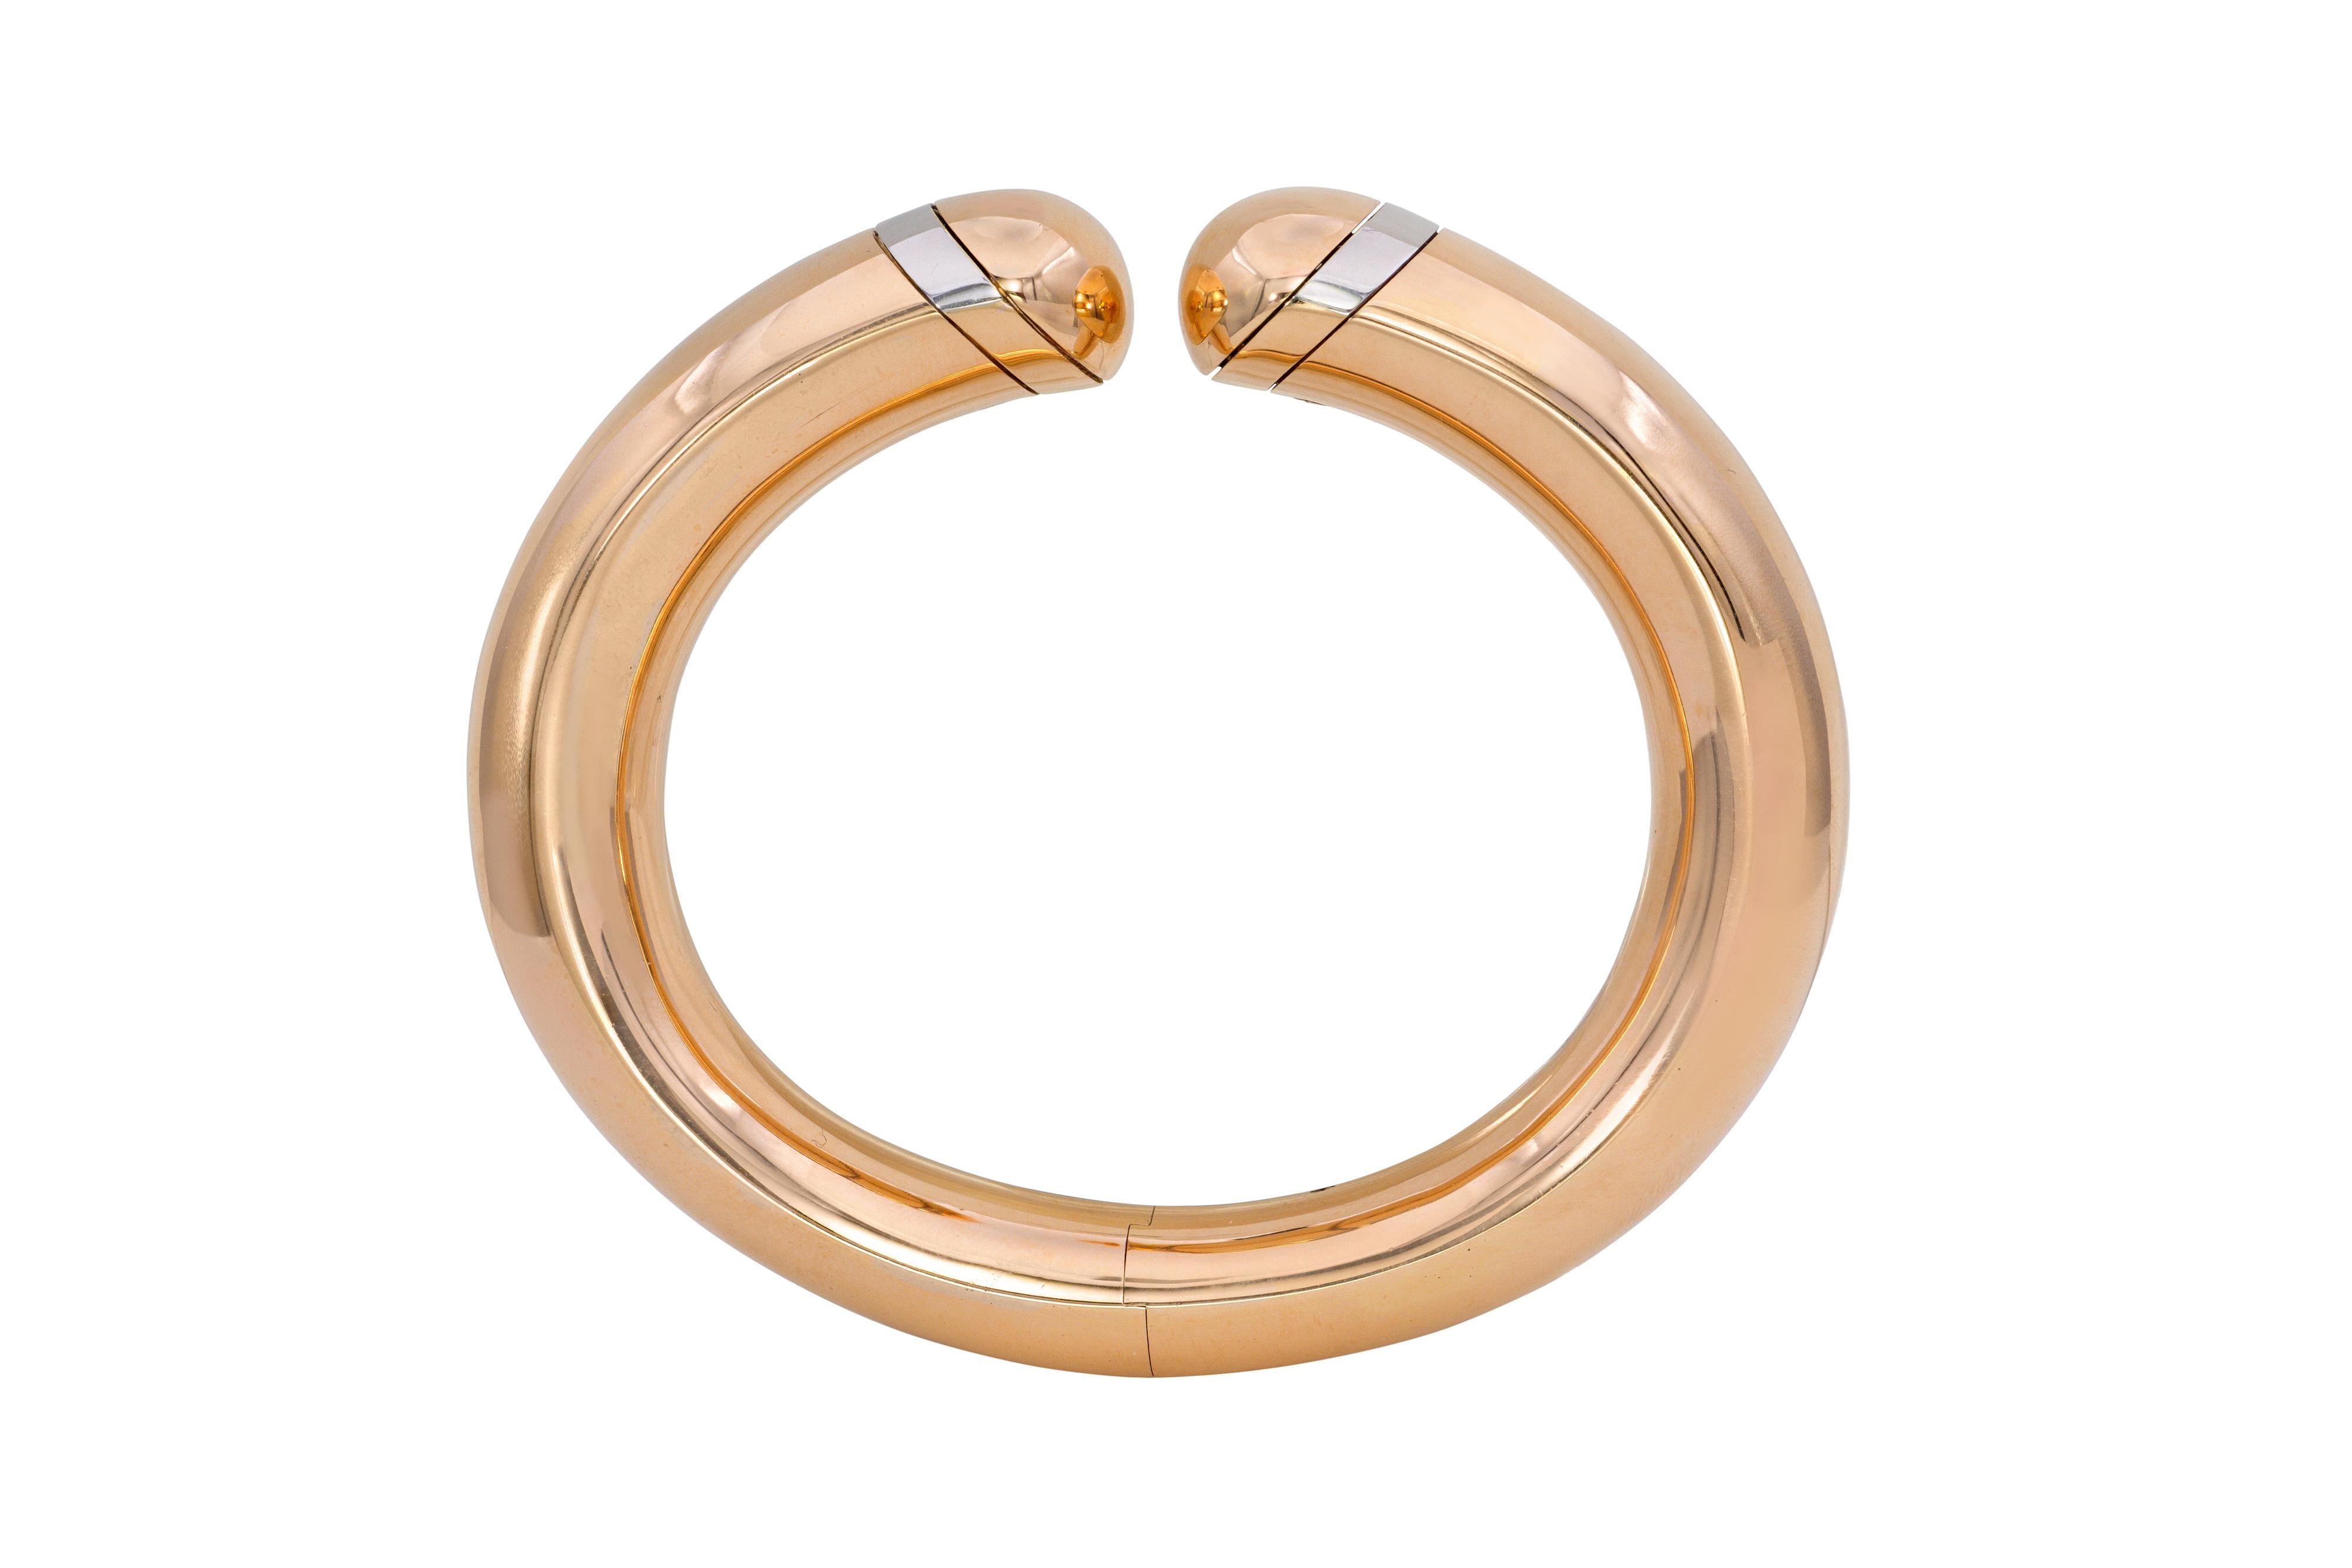 An 18 karat gold and platinum bangle, by Max Pollinger,  a German master jeweler who passed away in December 2000.  Extremely elegant and very comfortable.
Pollinger studied at the Academy of Fine Arts in Munich and was a student of jewelry and